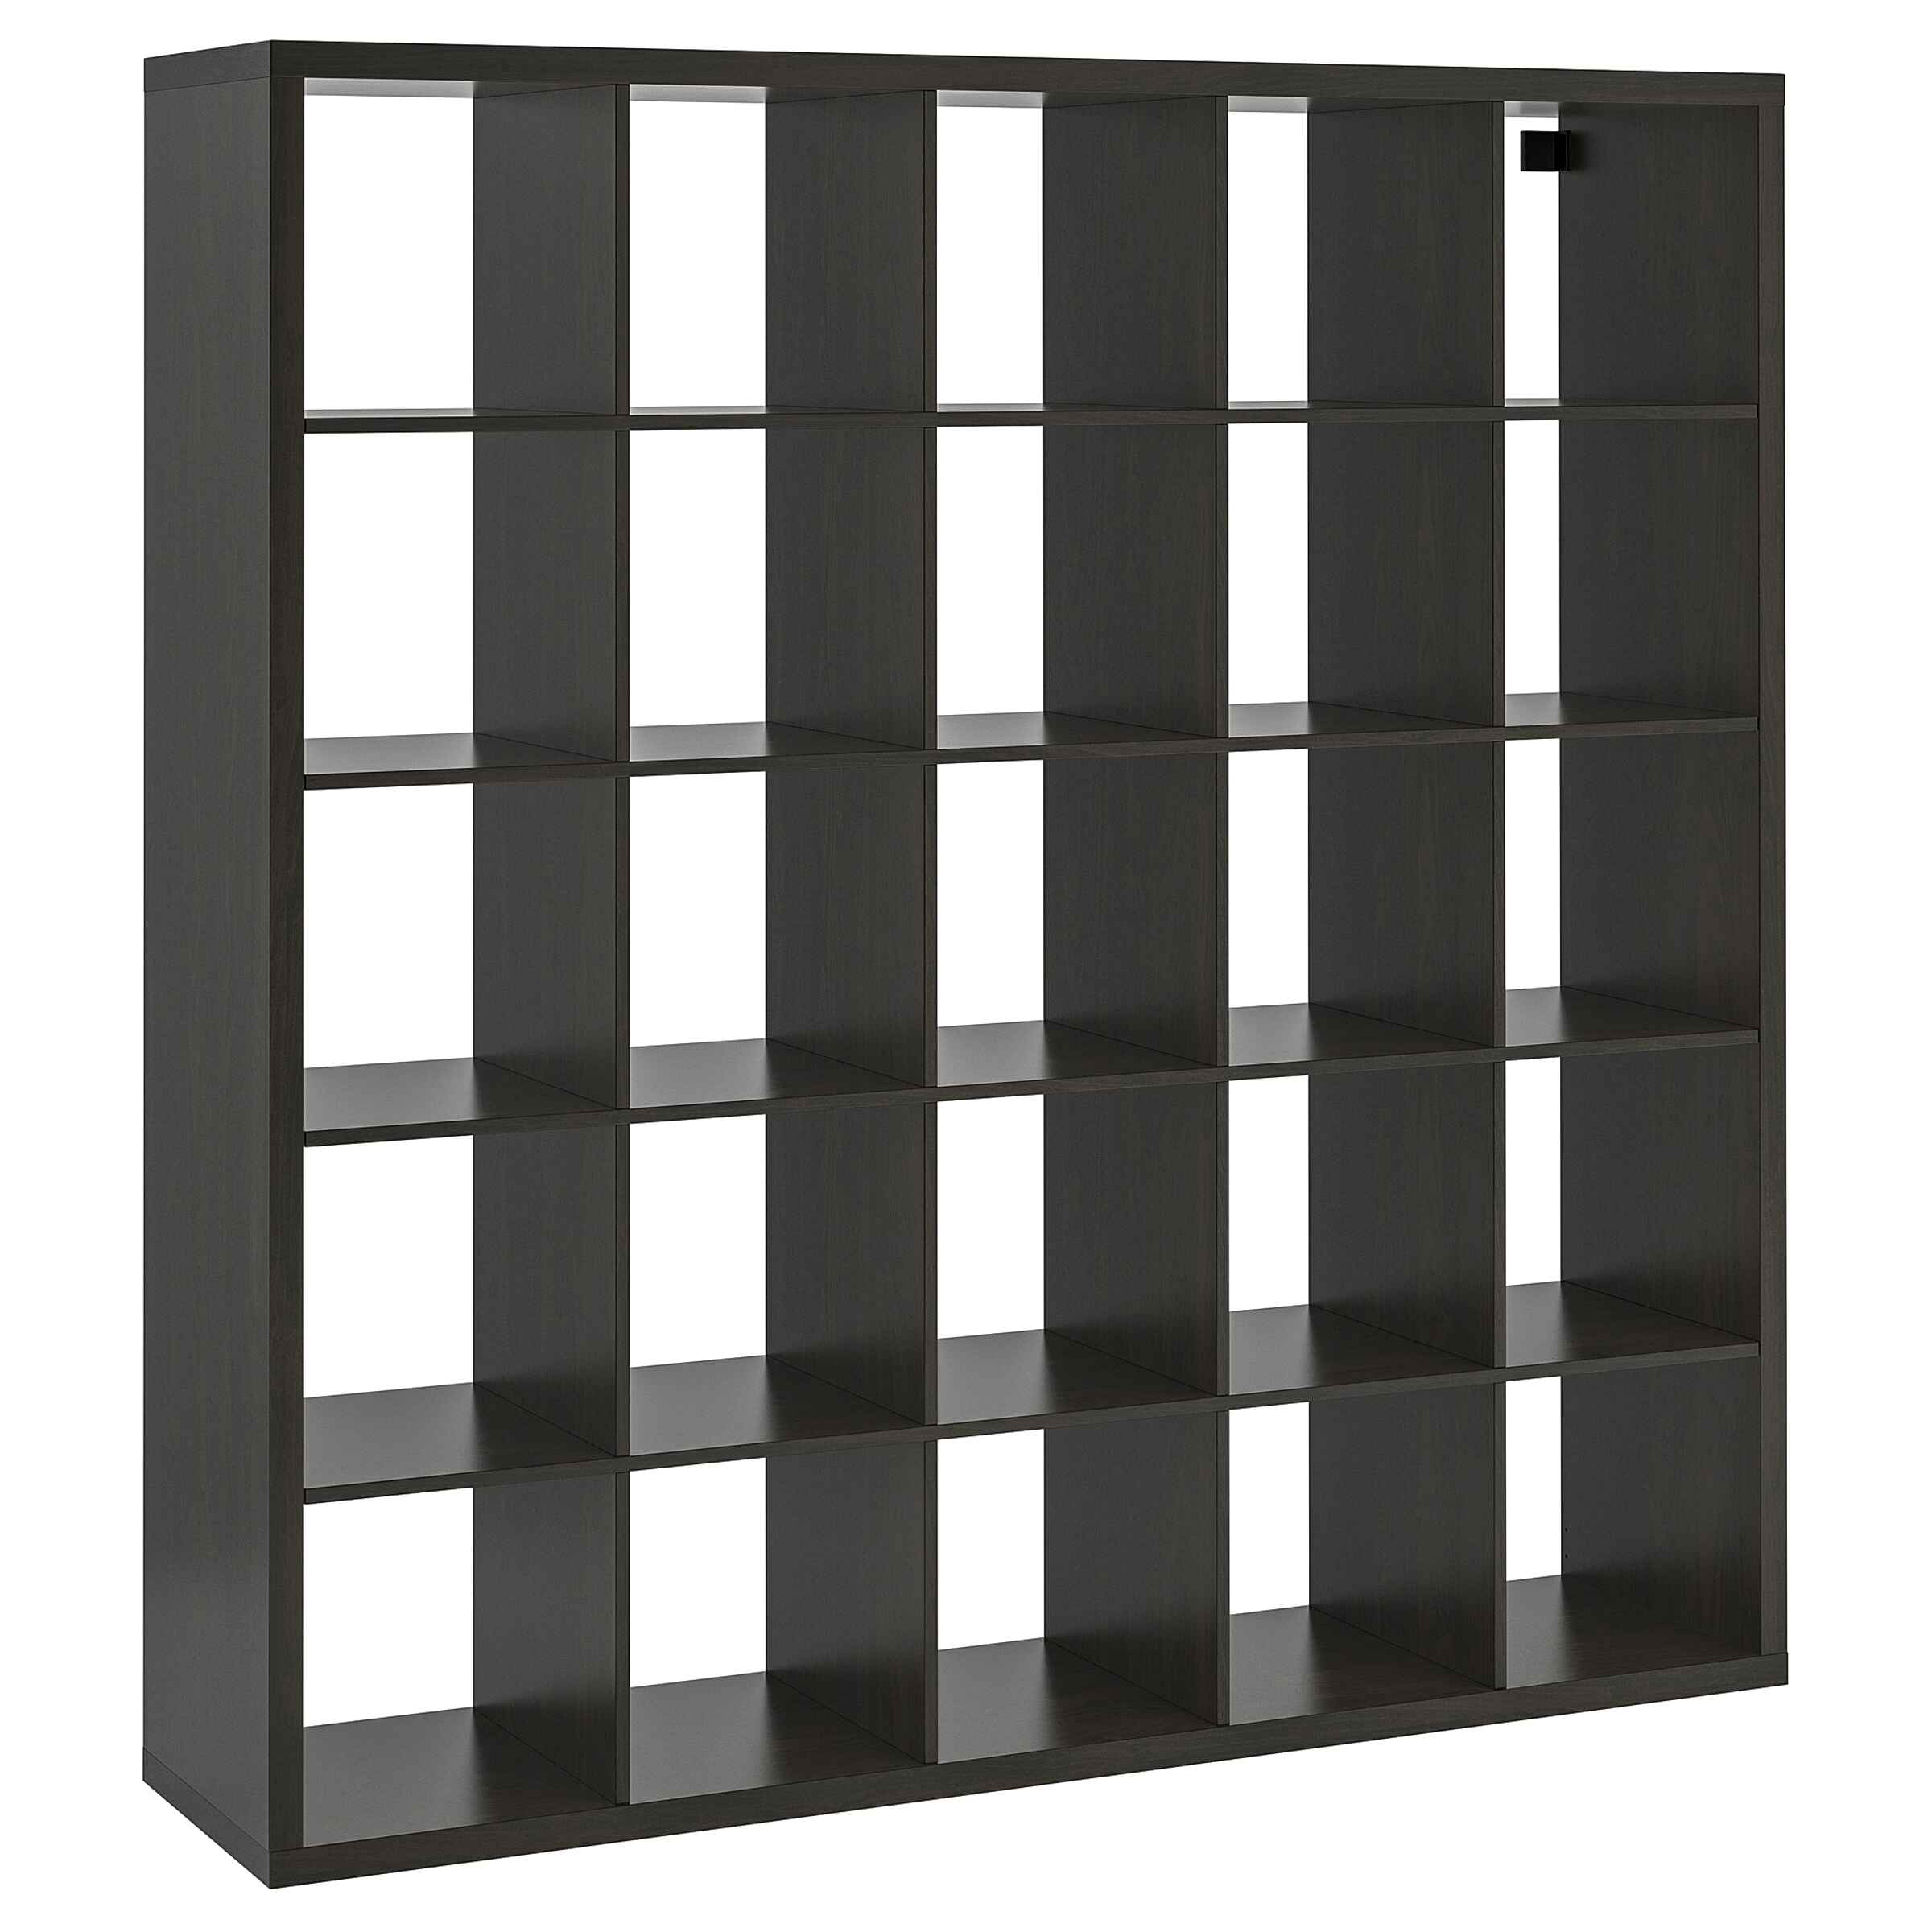 Ikea Expedit Bookcase For Sale In Uk View 26 Bargains